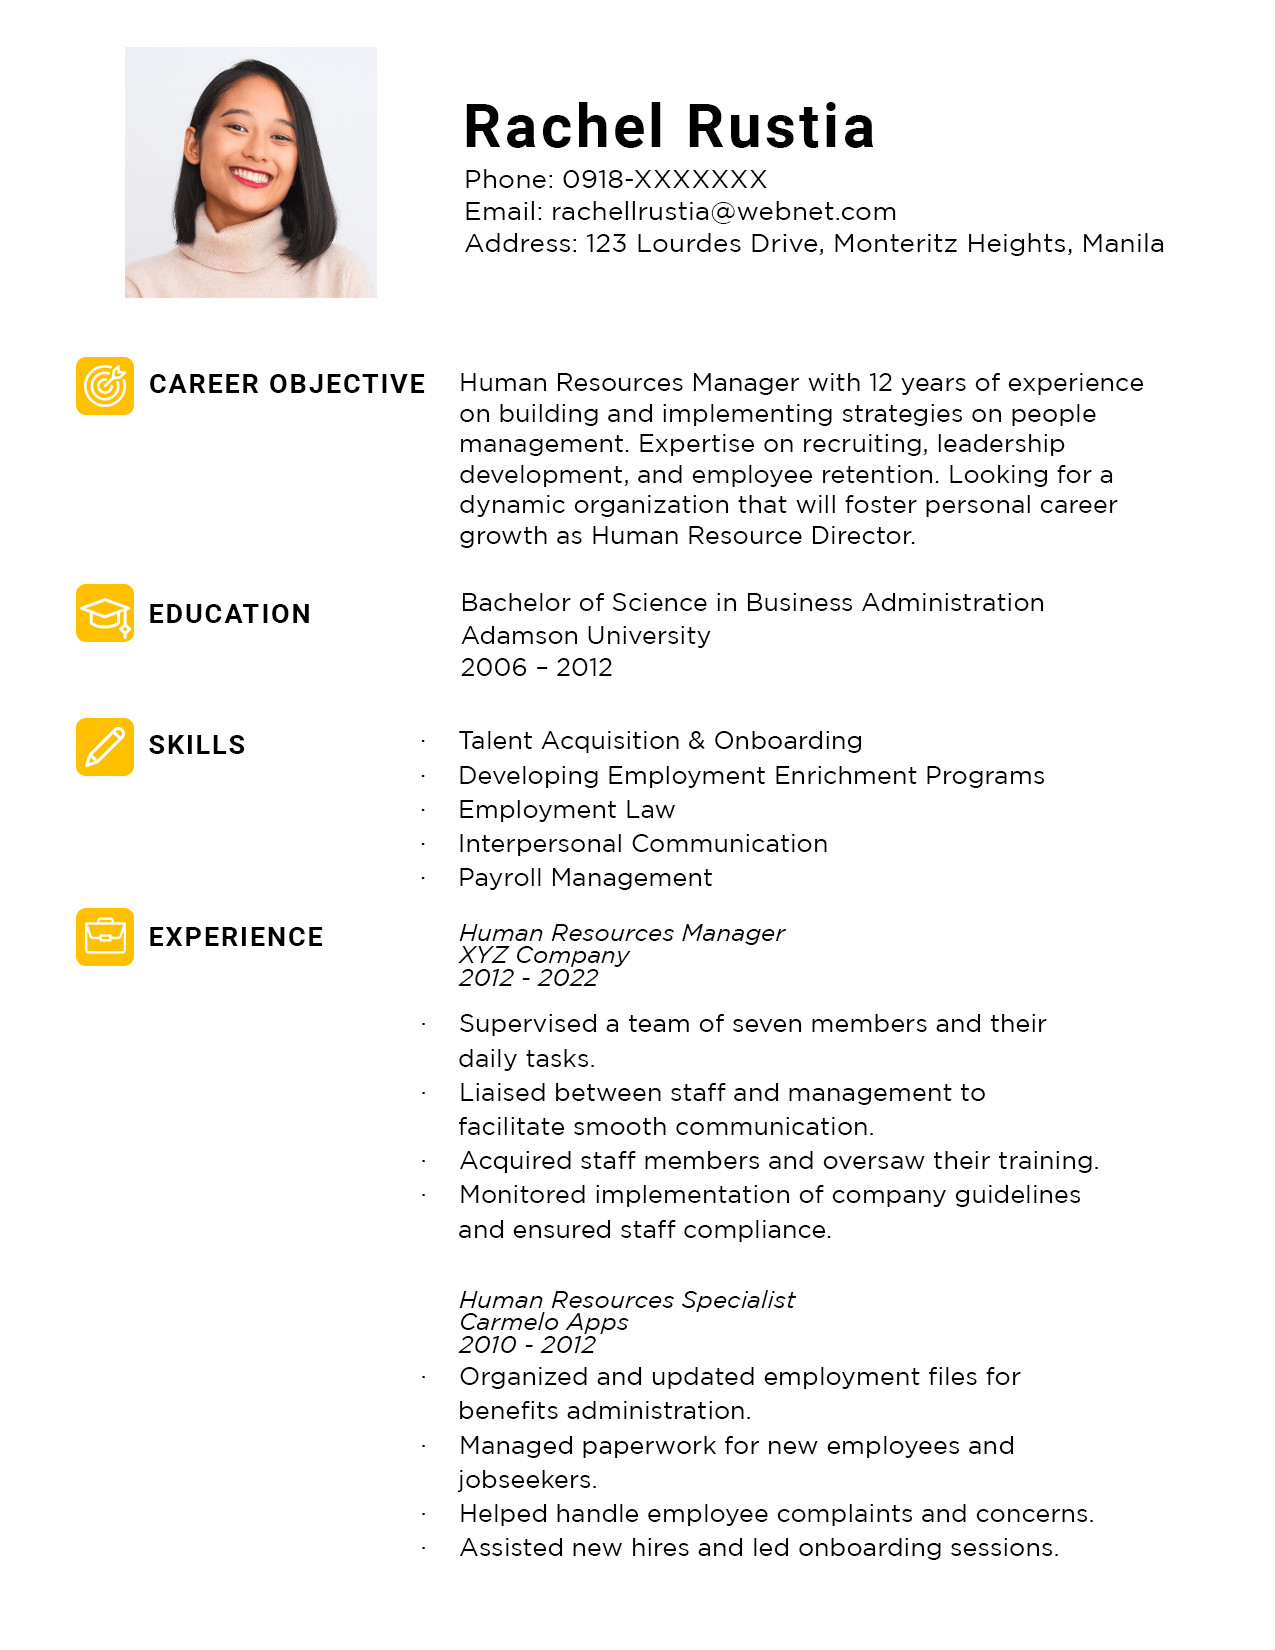 Resume format Sample for Job Application Philippines Resume Templates You Can Download for Free!